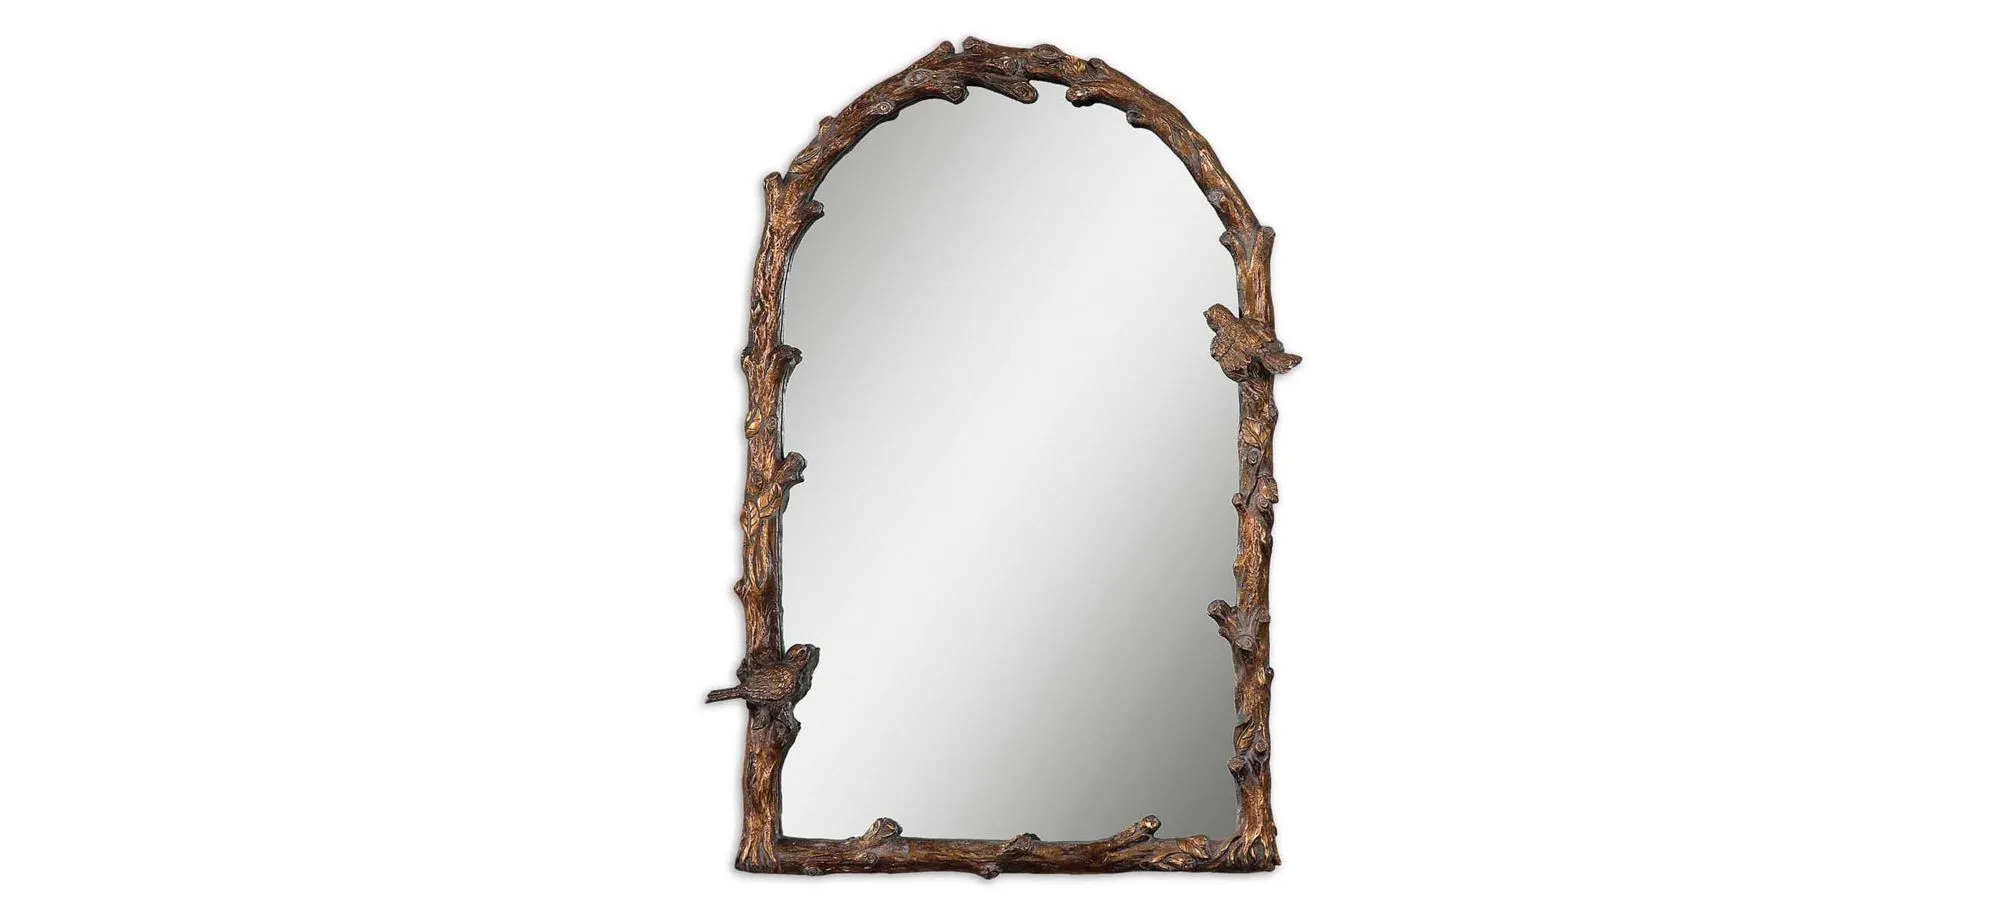 Paza Arch Wall Mirror in Antiqued Gold Leaf by Uttermost